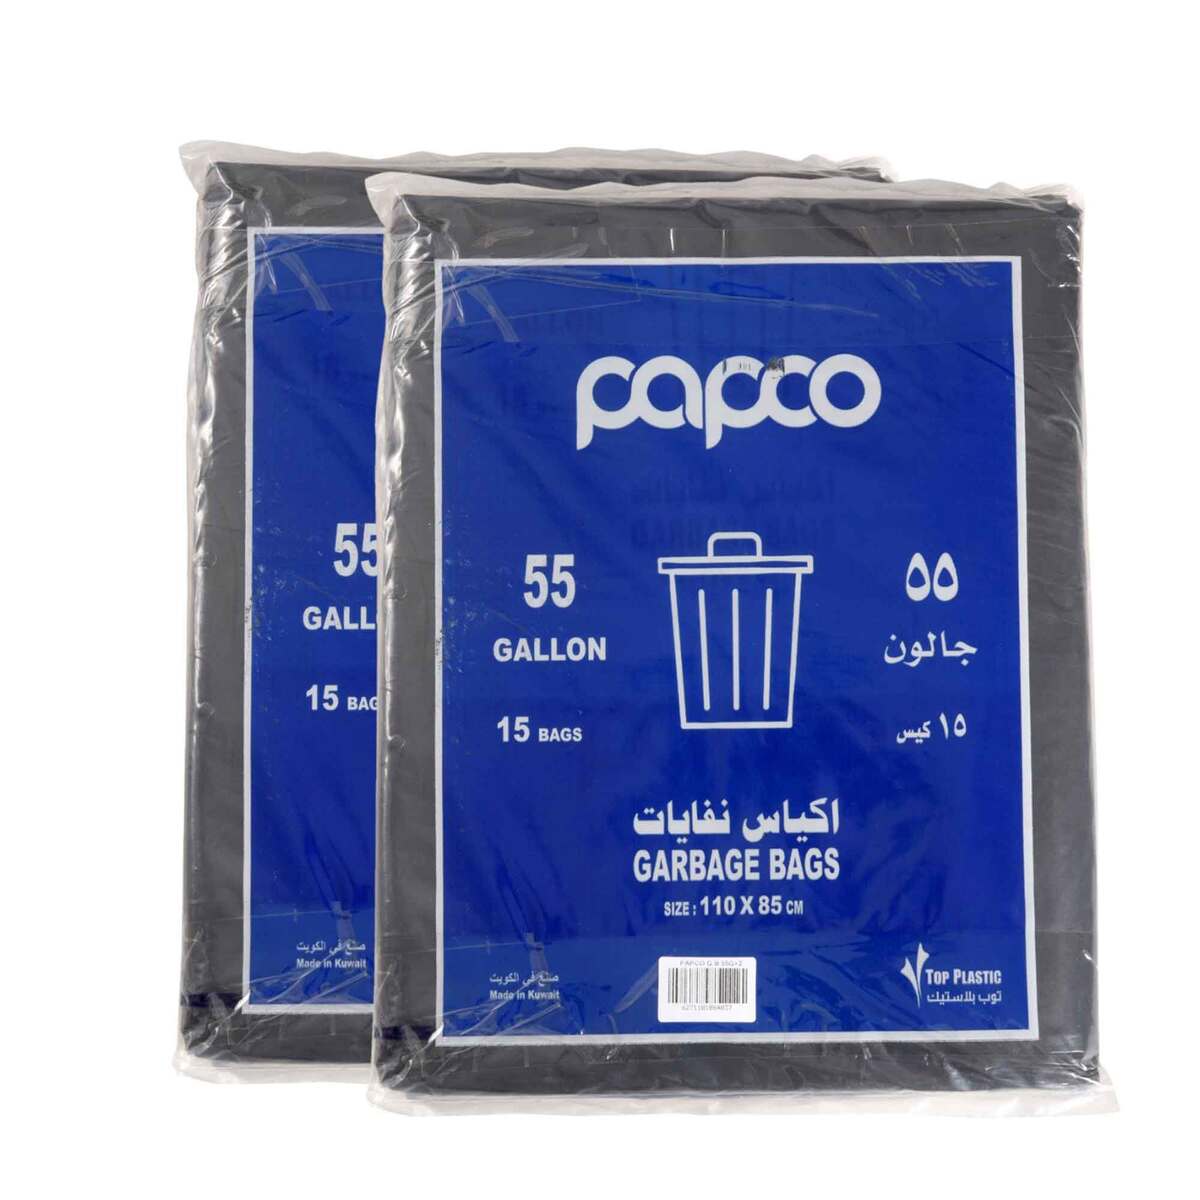 Buy Papco Garbage Bags 110 x 85cm 55 Gallons Value Pack 2 x 15 pcs Online at Best Price | 1/2 KD 1 KD 2 KD OFFERS | Lulu Kuwait in Kuwait